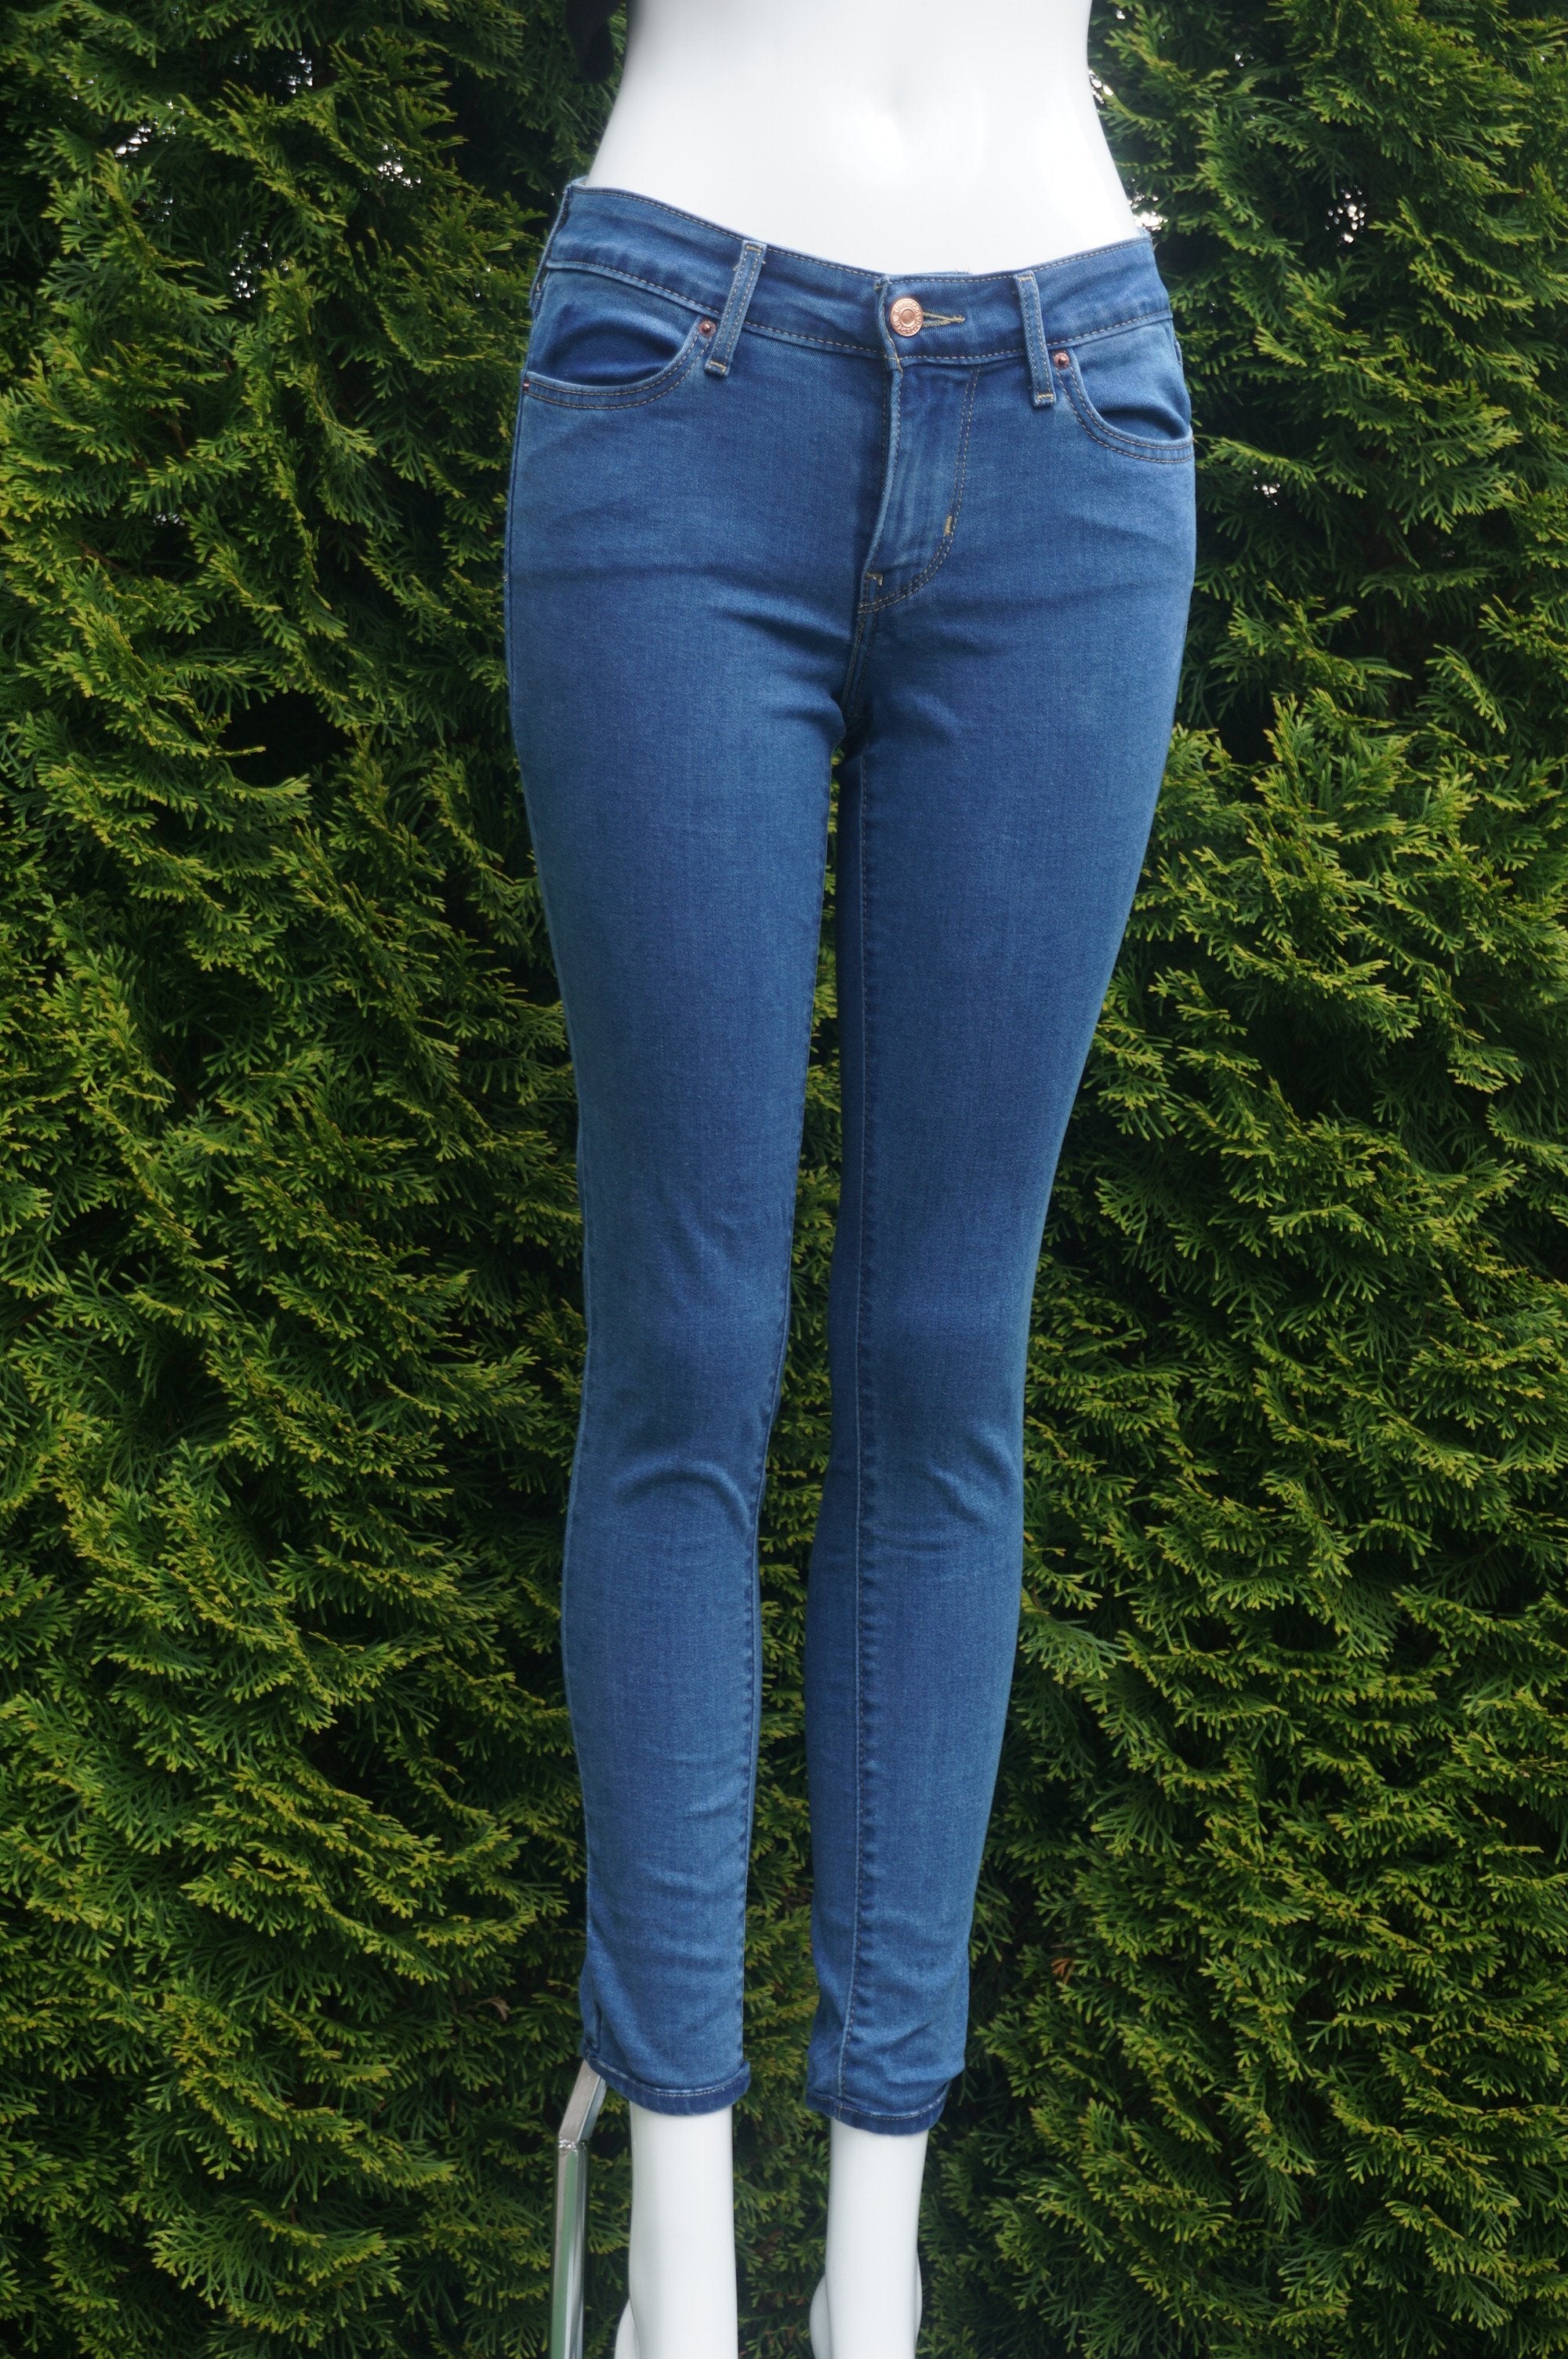 Levi Altered Skinny Jeans, Super comfy stretchy skinny jeans from Levi's. W26, L30, Blue, 62% cotton, 23% Polyester, 12% Viscose, 3% Elastane, women's Pants, women's Blue Pants, Levi Altered women's Pants, women's skinny jeans, comfortable jeans, stretchy jeans